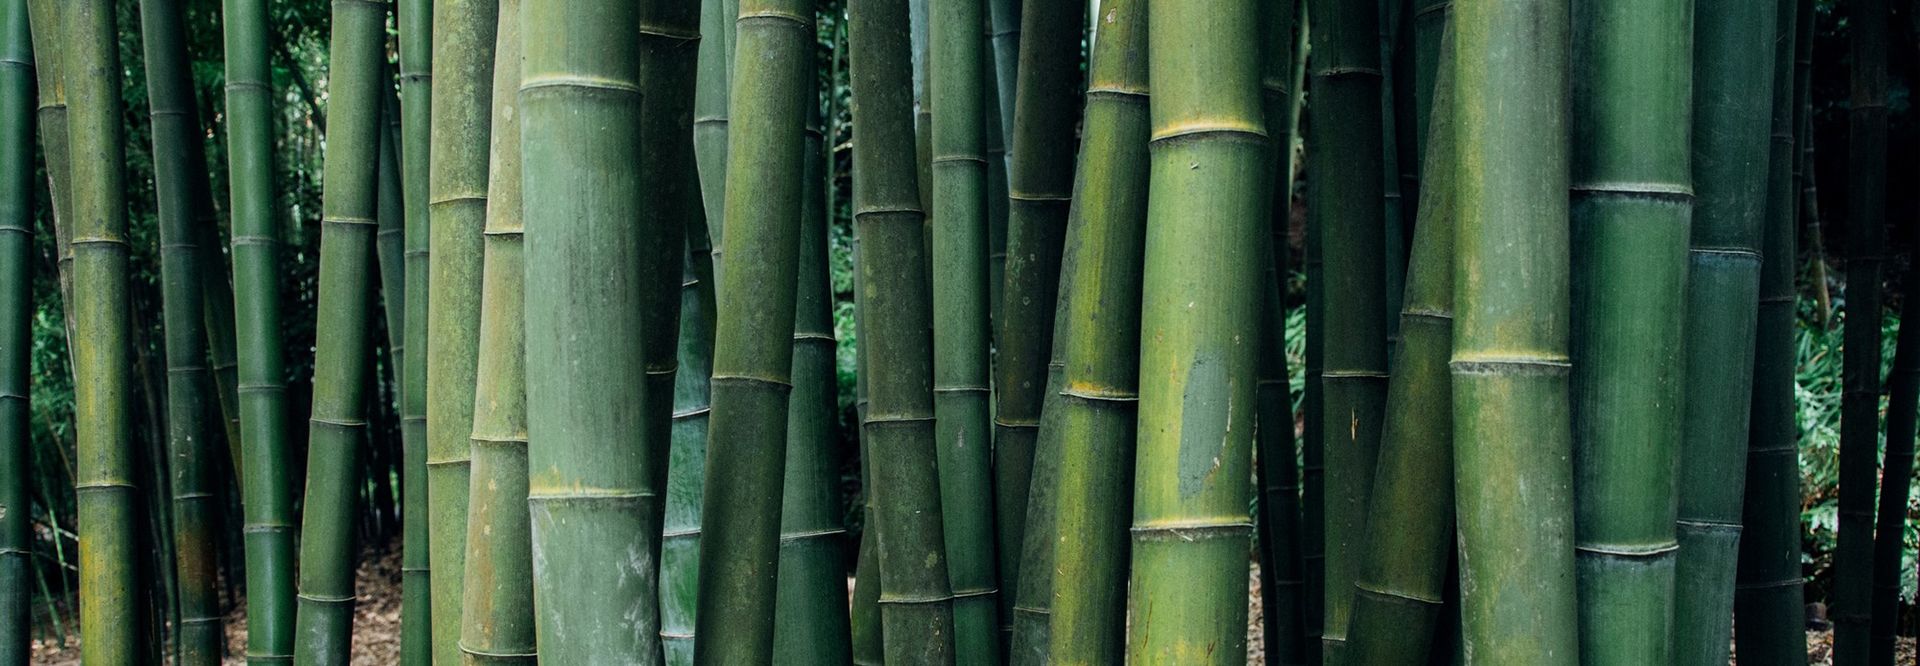 Bamboo, ecological and sustainable material